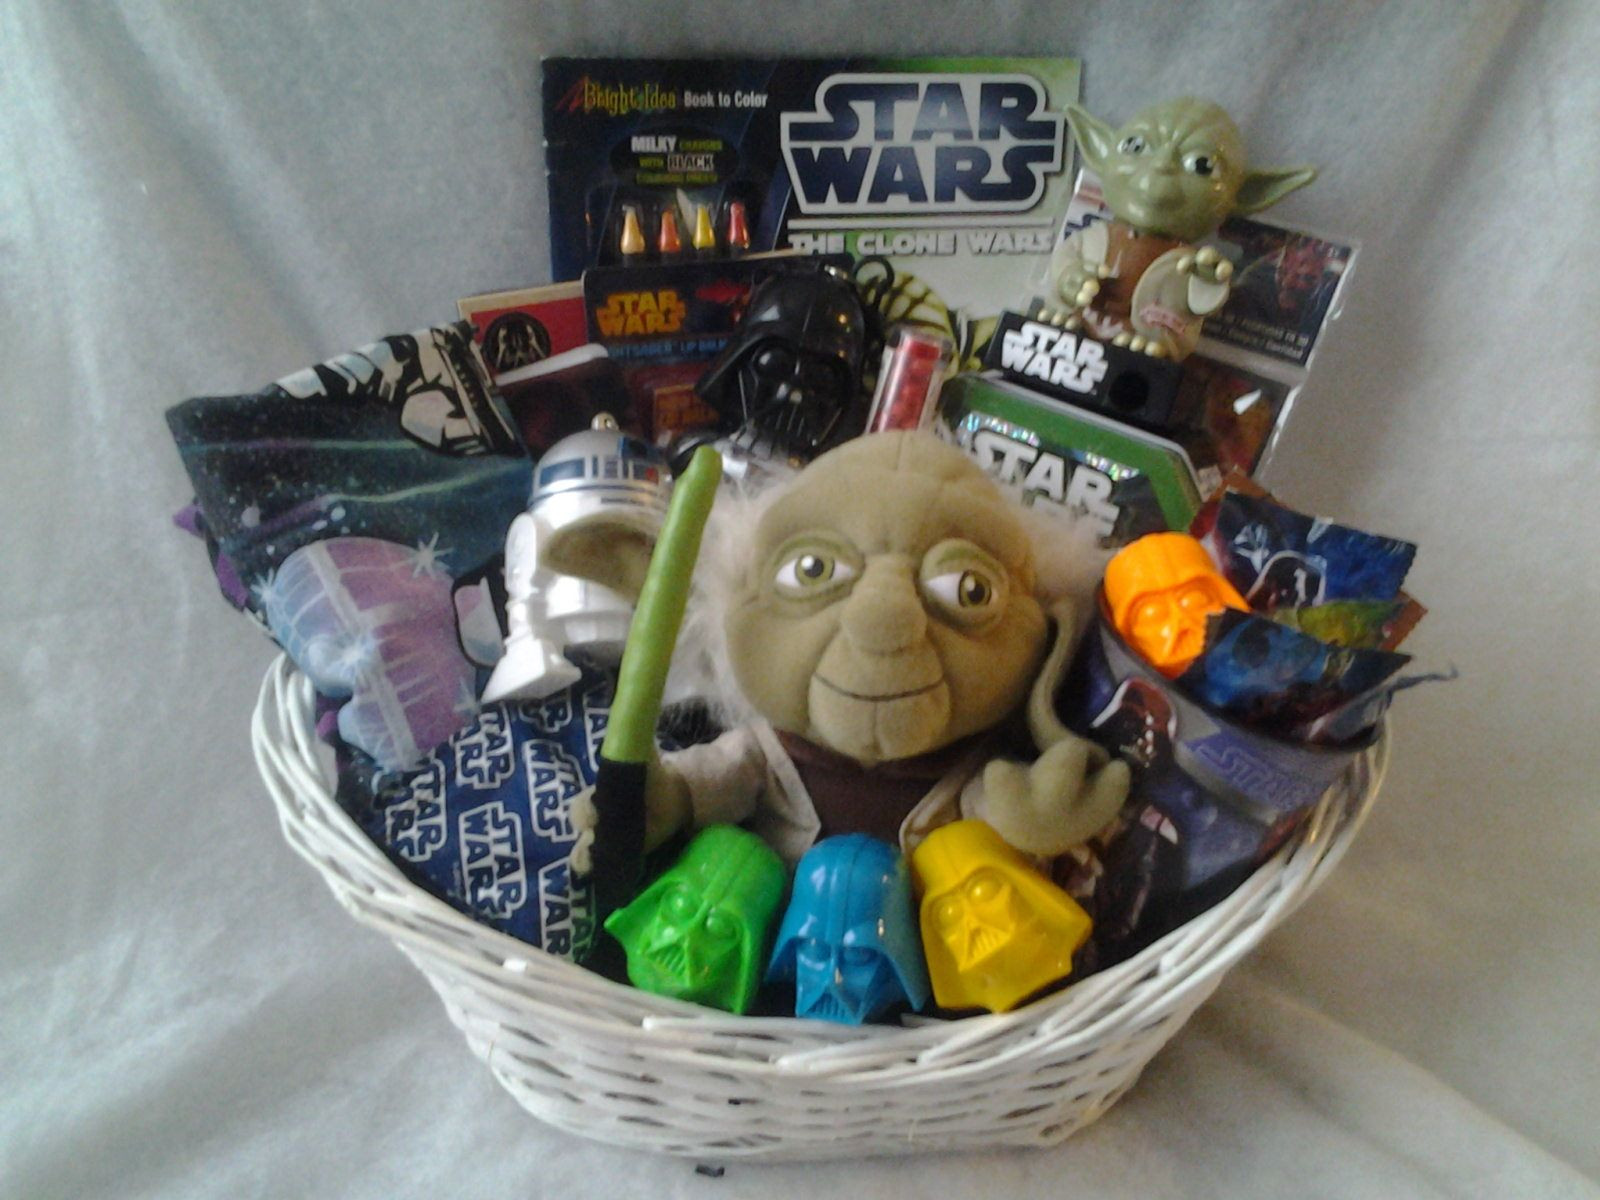 Star Wars Gift Basket Ideas
 e made to the order Star Wars Gift Basket The perfect